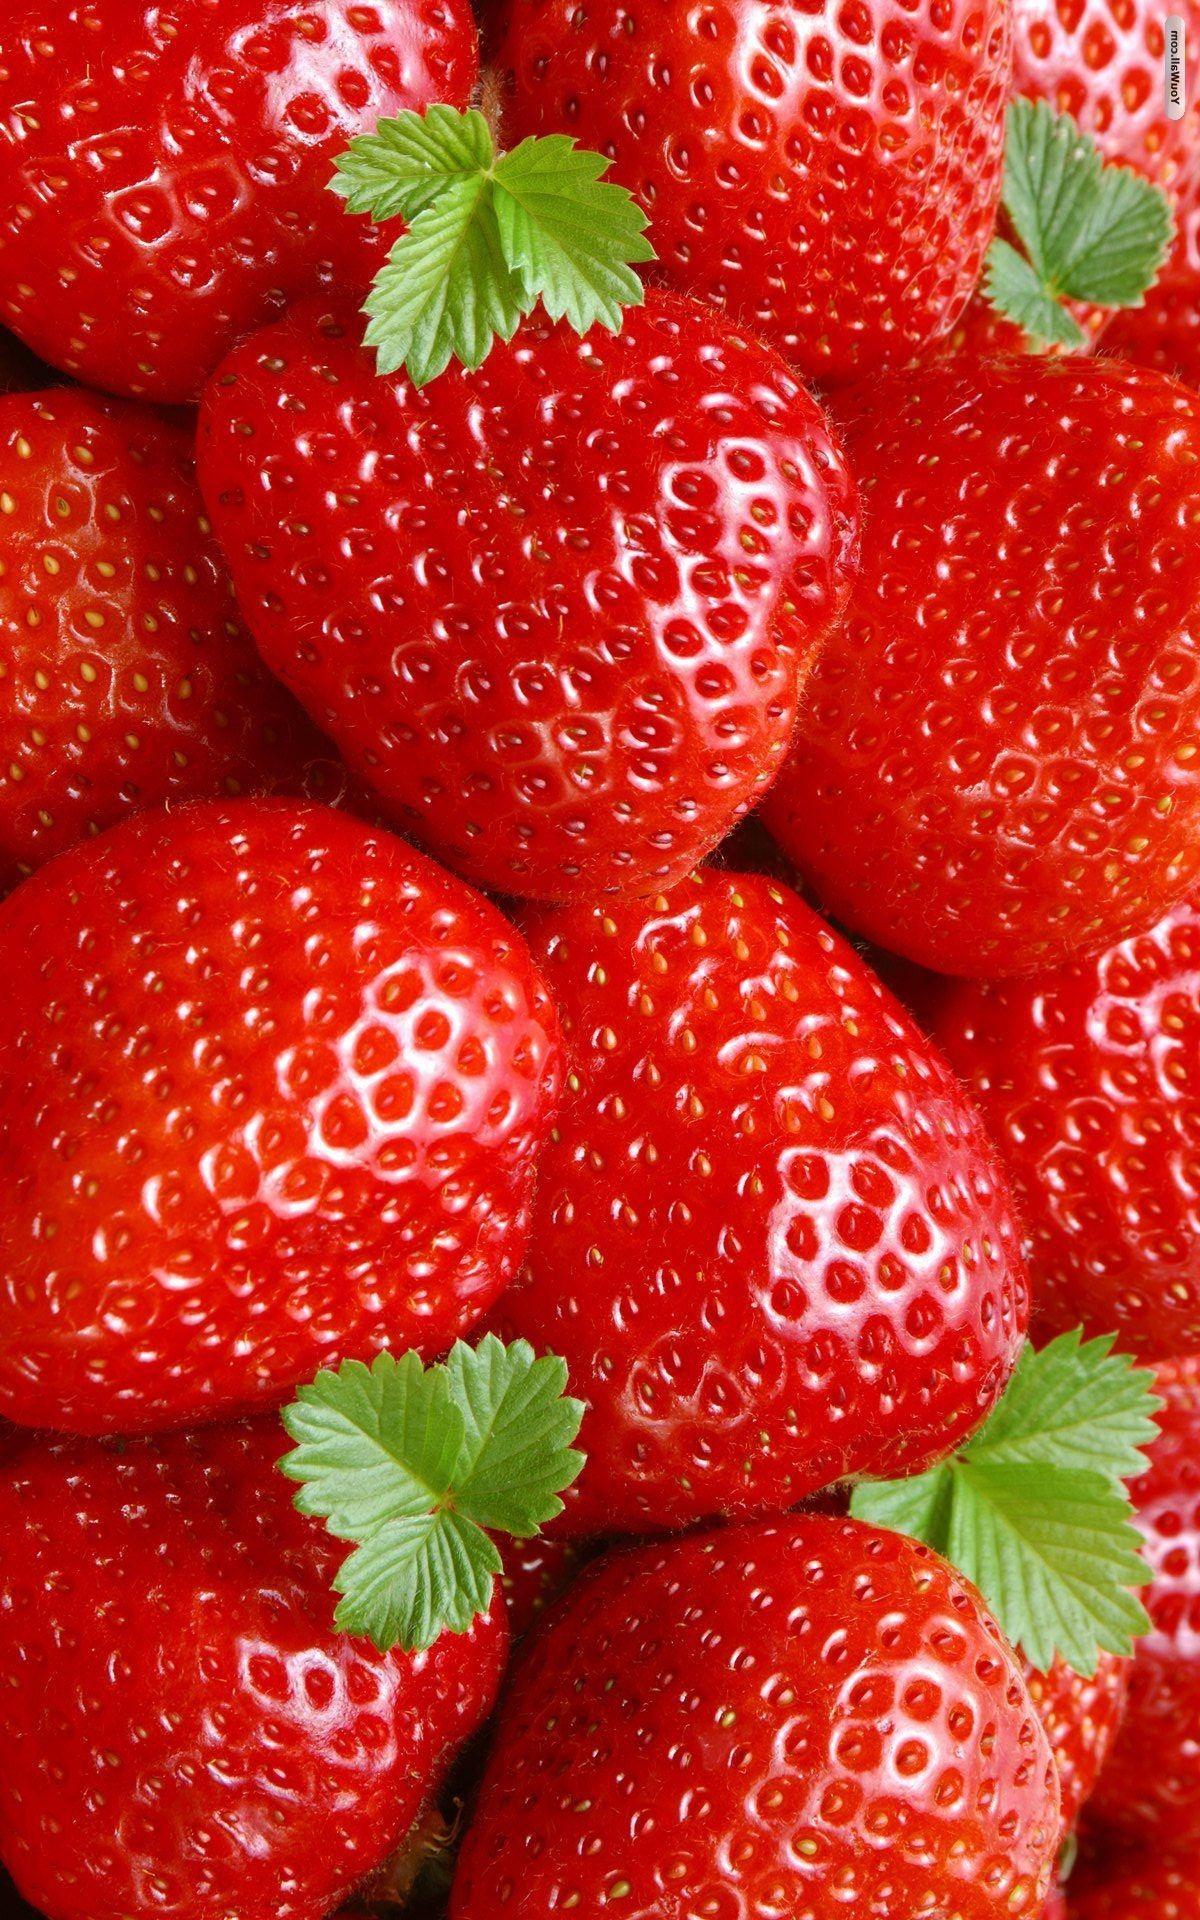 Strawberry Aesthetic Wallpapers - Top Free Strawberry ...